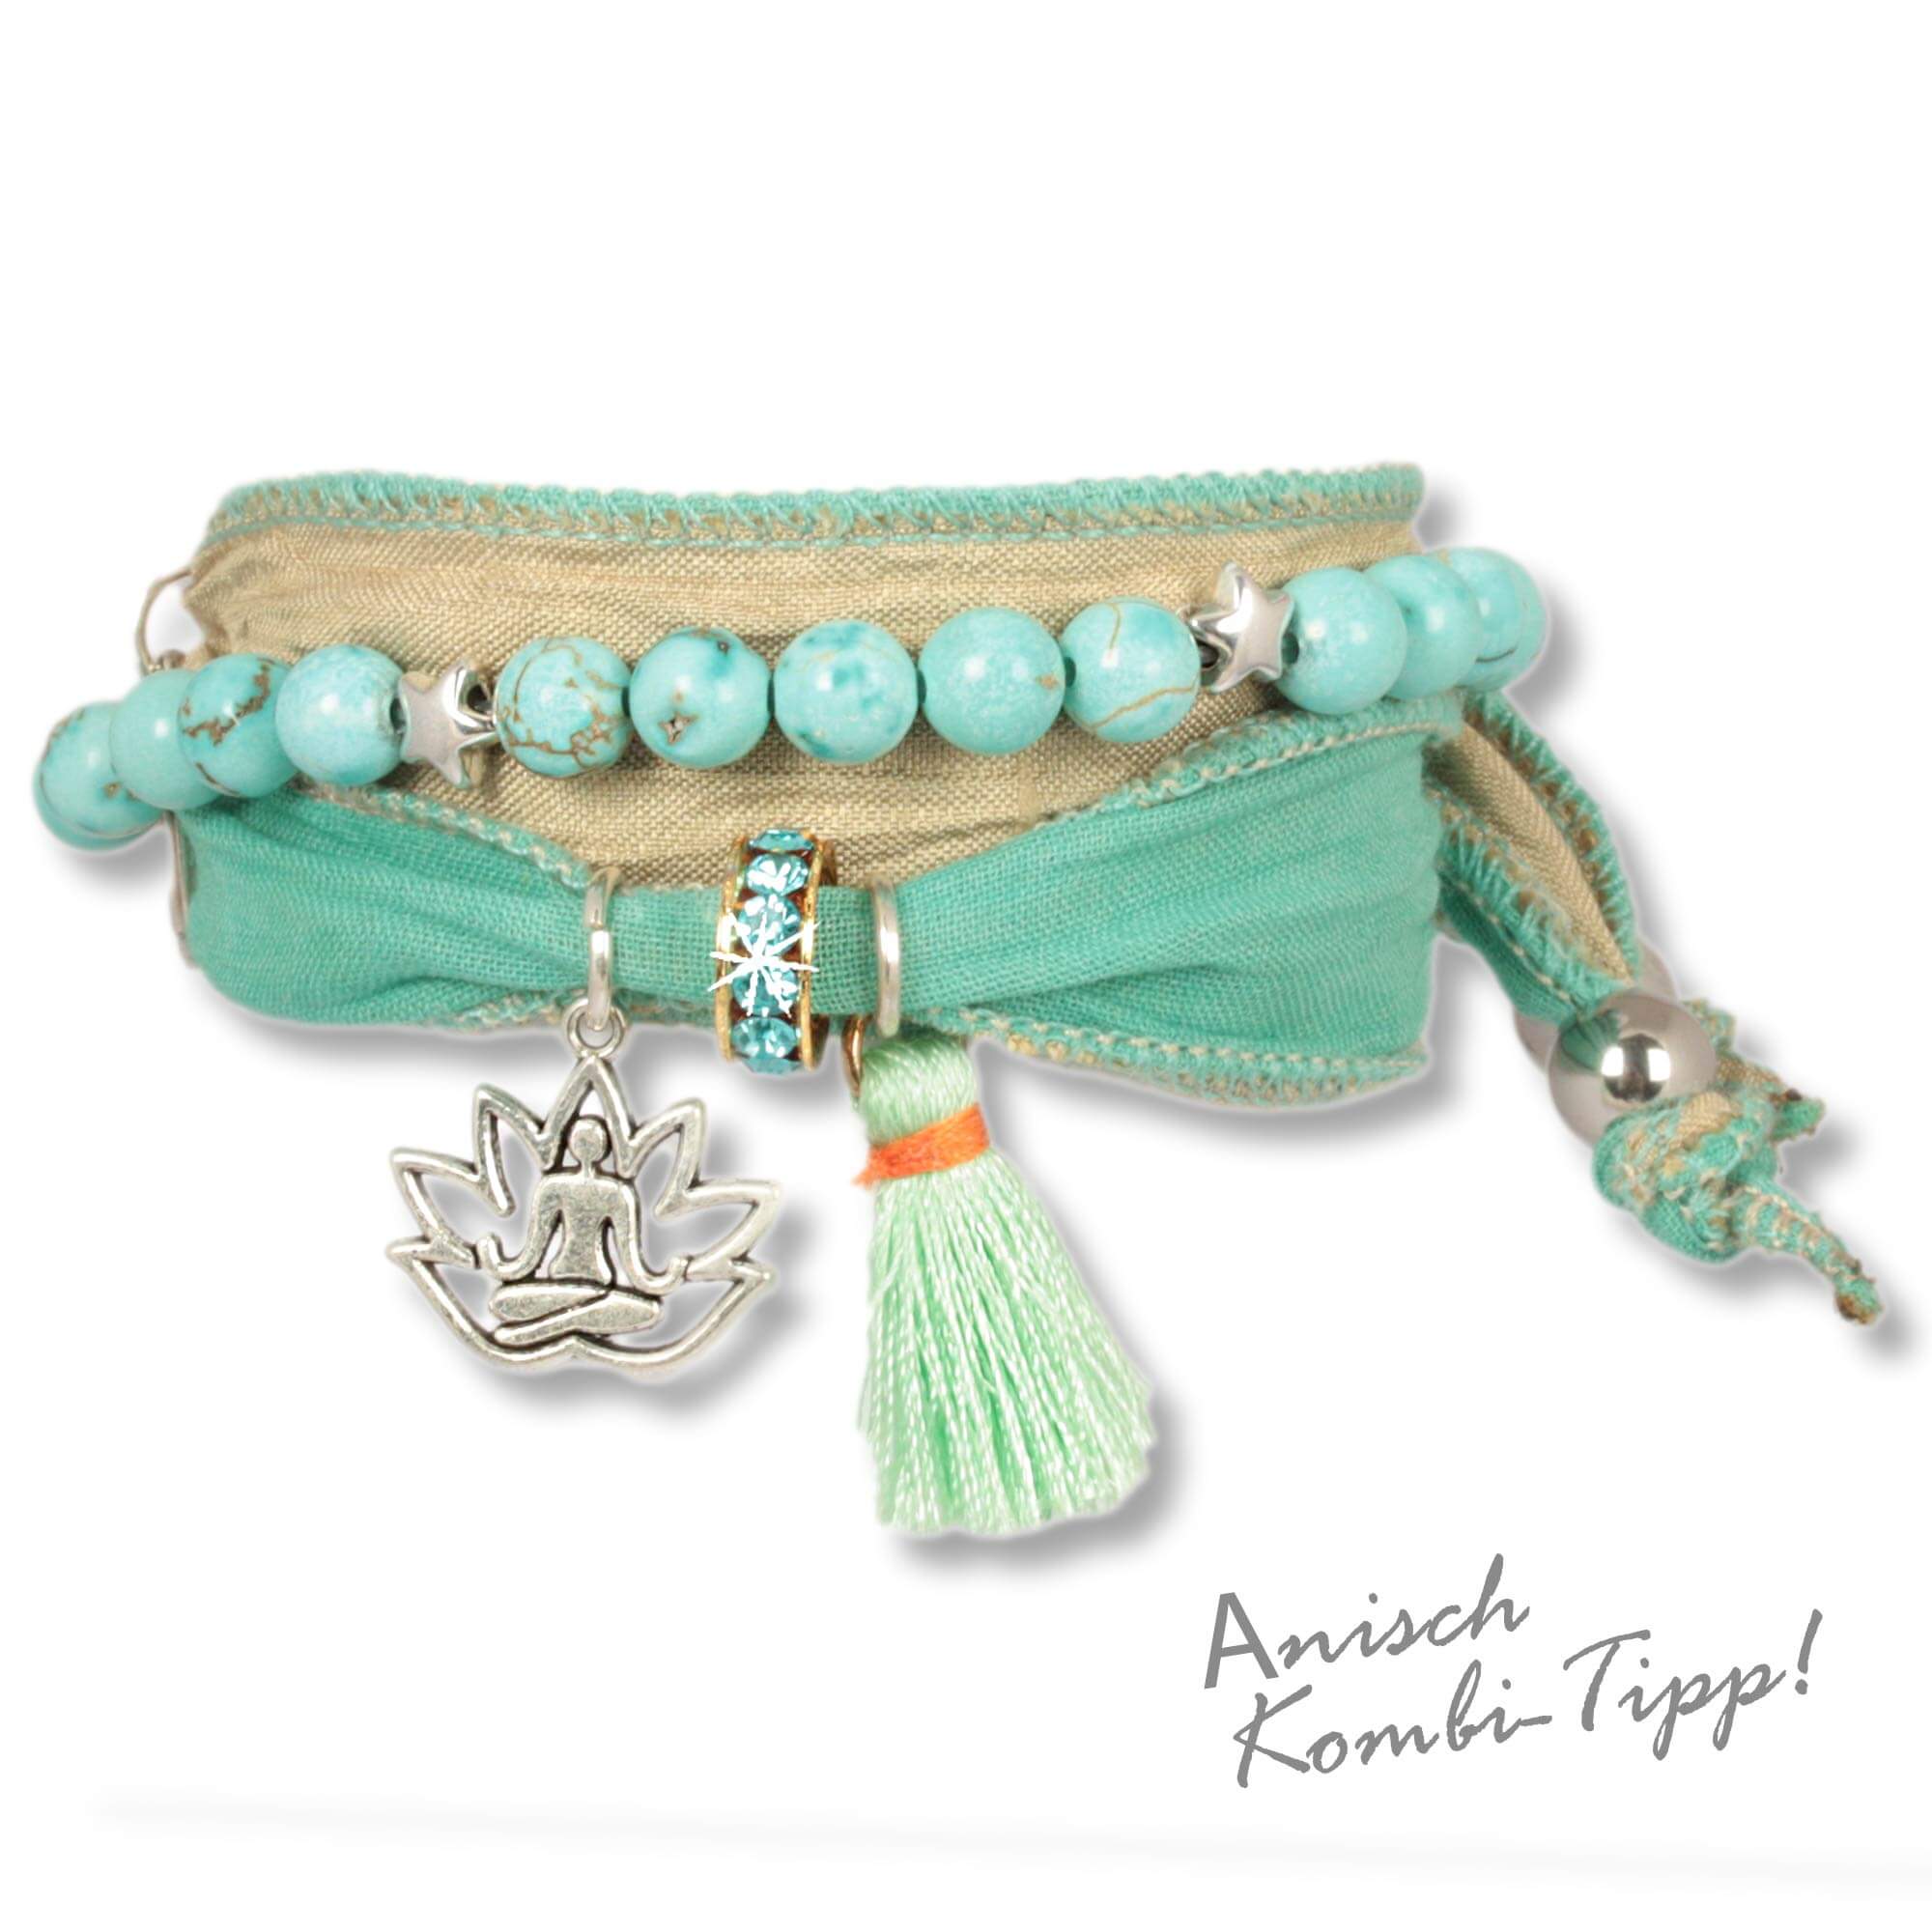 Handmade fabric bracelet made from saris and silk fabrics in mint green and natural colours. Decorated with a metal lotus flower depicting a meditating Buddha, a mint green silk tassel and a rondel set with Czech crystals. Anísch